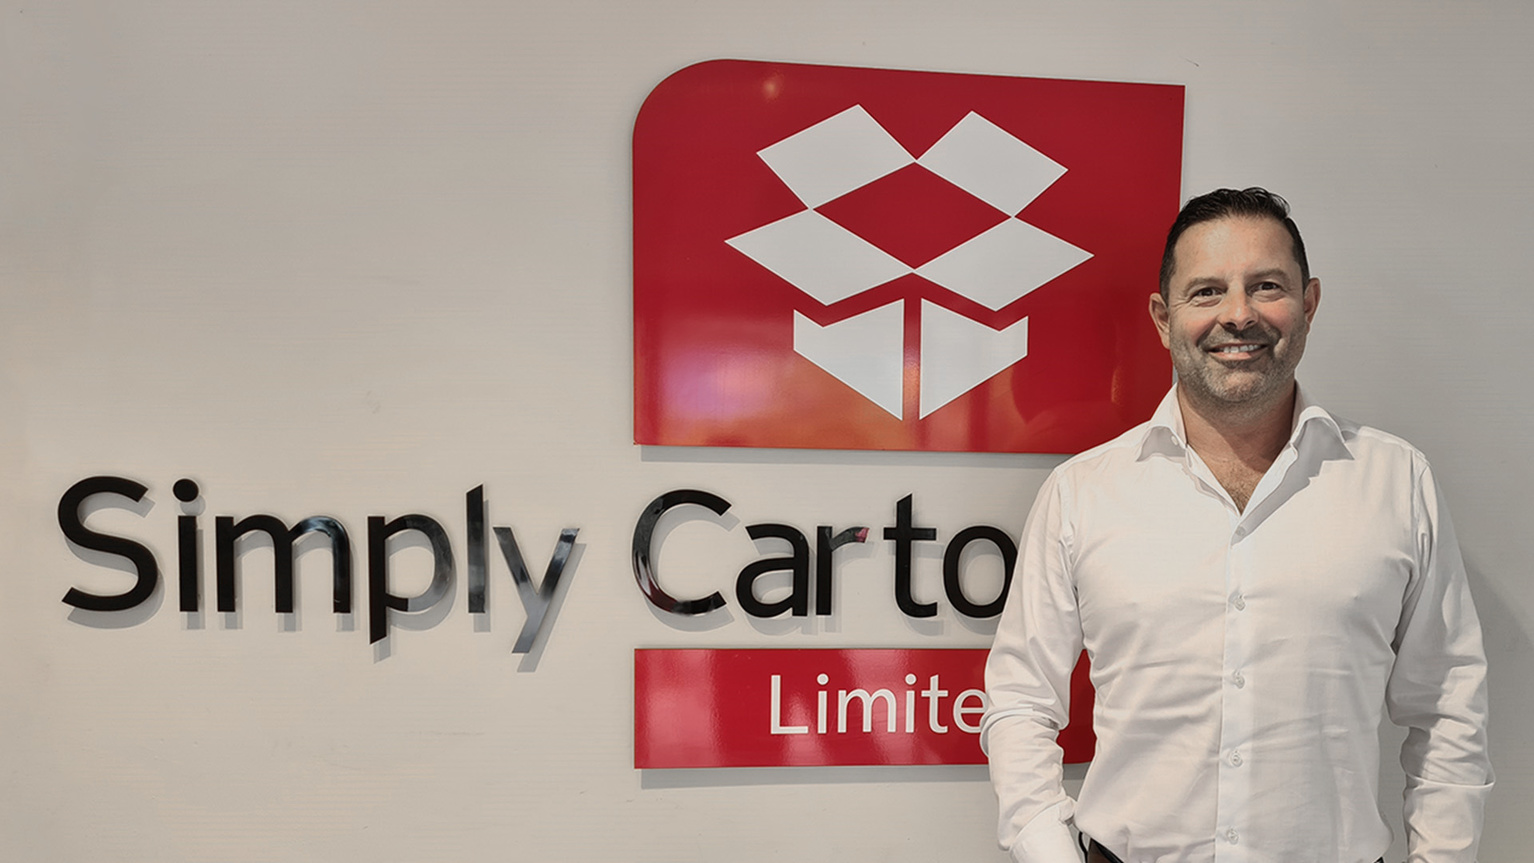 Carton manufacturer Simply Cartons trusts in BOBST to support business growth